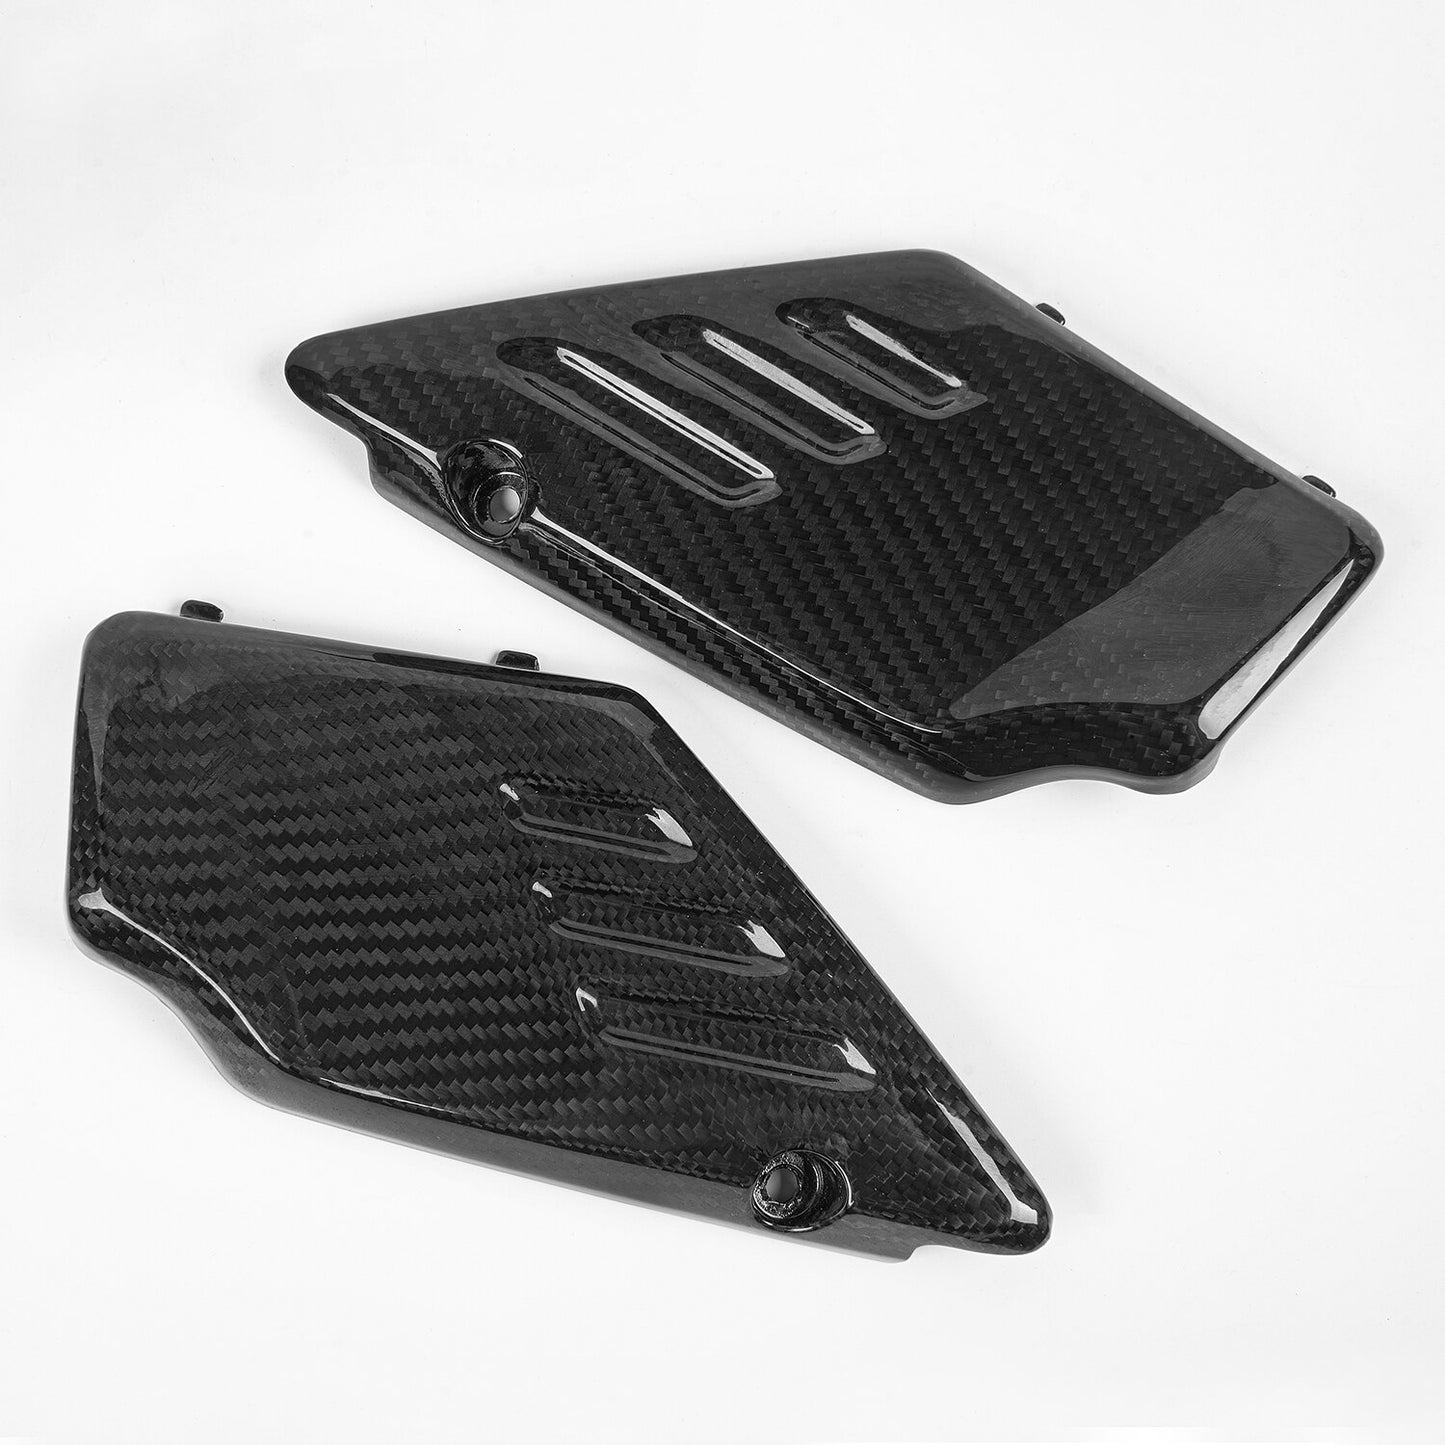 Wolfline Motorcycle Accessories Front Frame Side Cover For Kawasaki Z650RS 2022 2023 Real Carbon Fiber Cowl Panel Trim Body Fairings